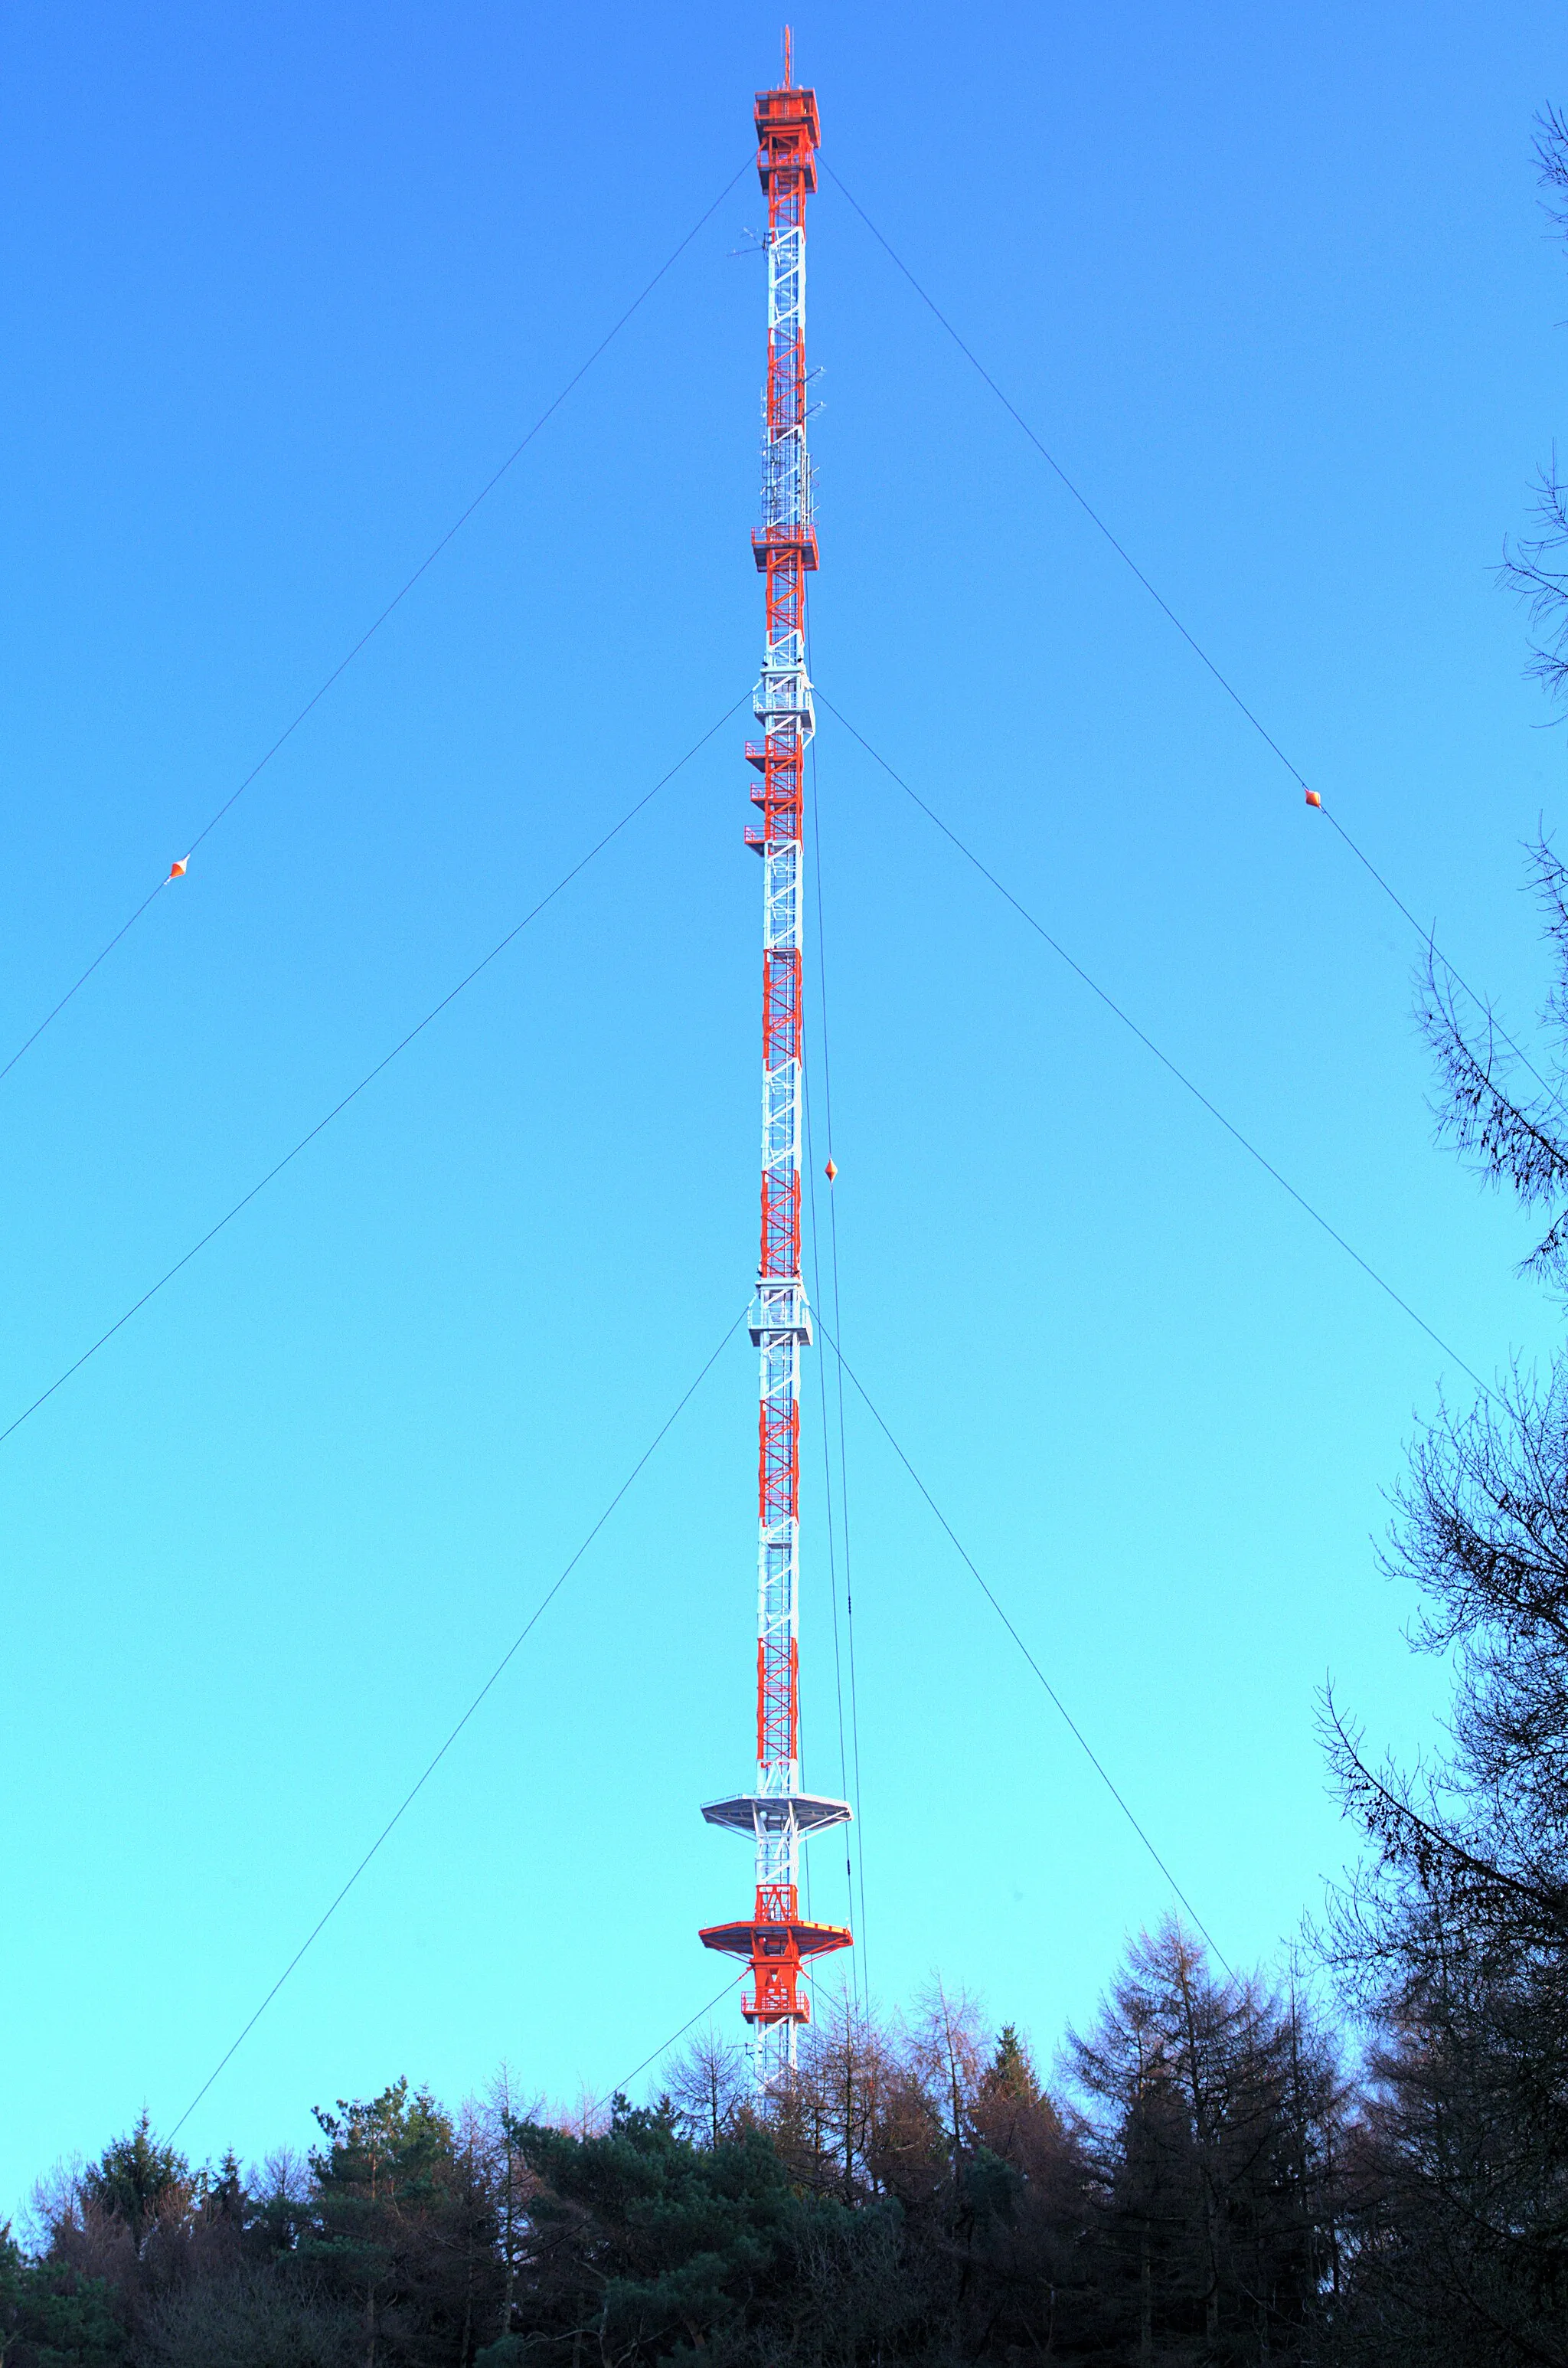 Photo showing: The radio transmission mast in Peheim village (Molbergen municipality, Lower Saxony, Germany), seen from the north side.